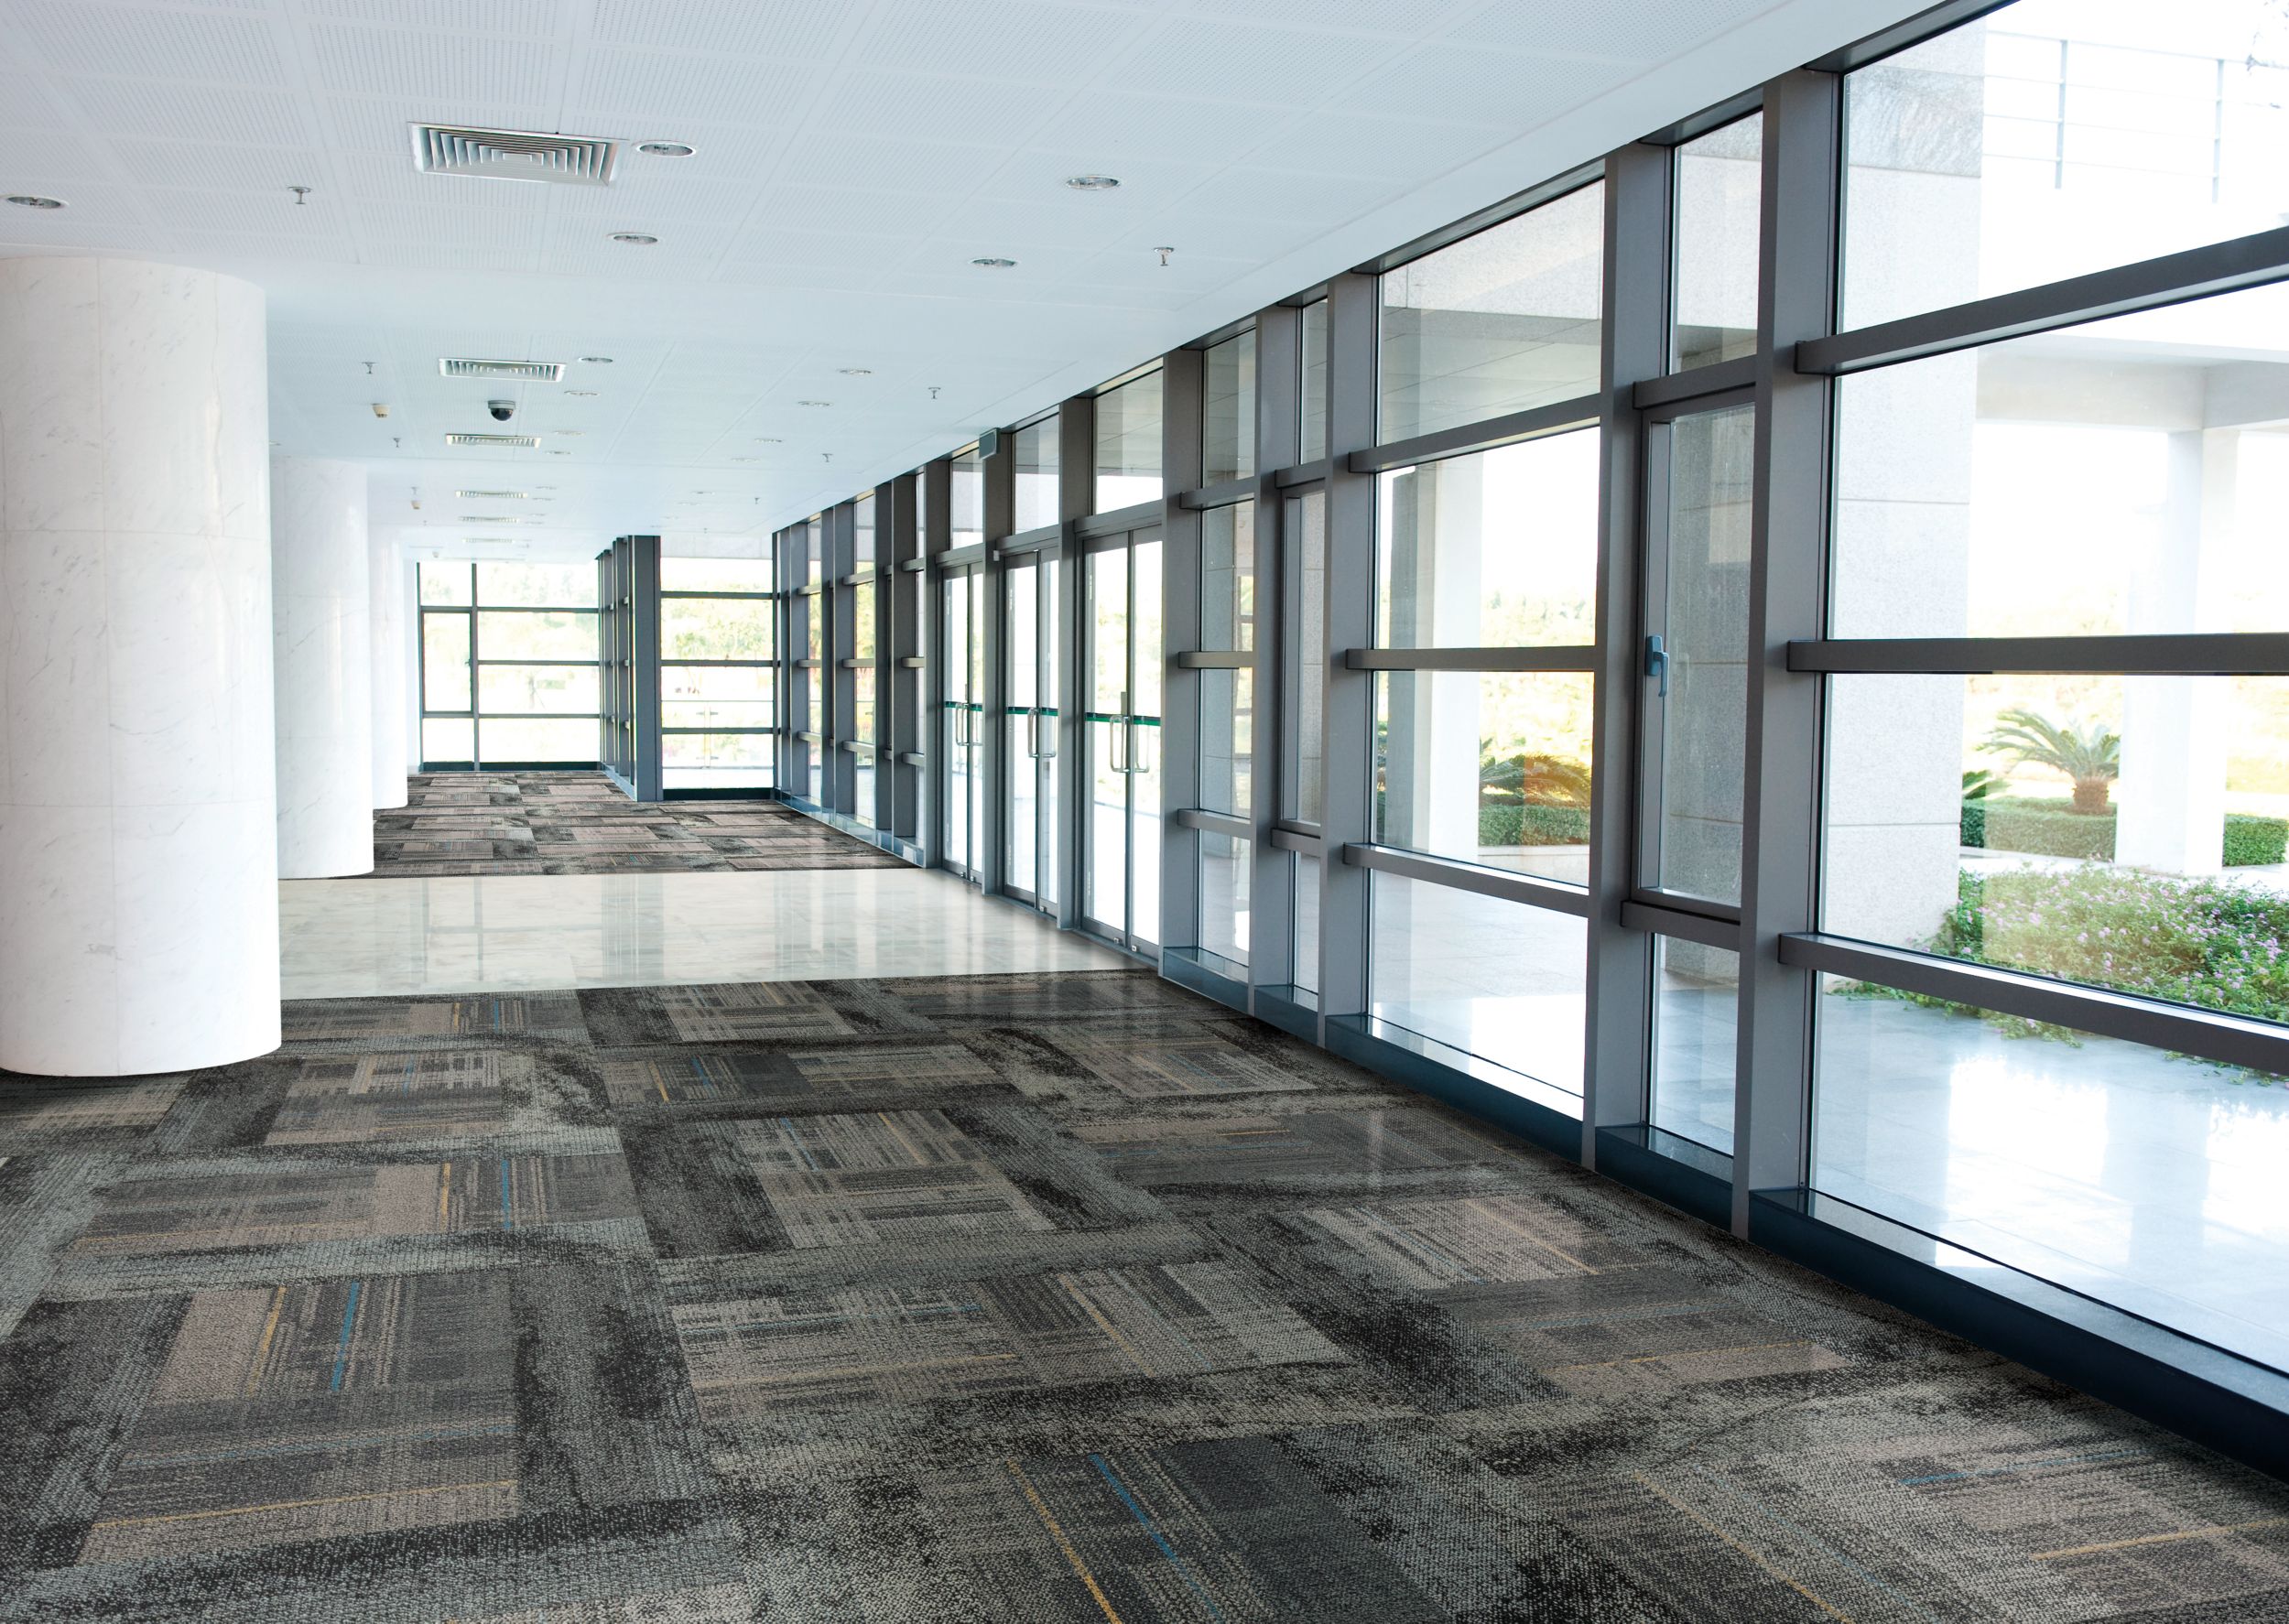 Interface AE312 carpet tile with Neighborhood Smooth plank carpet tile and Interface Textured Stones LVT in corridor with glass walls numéro d’image 11